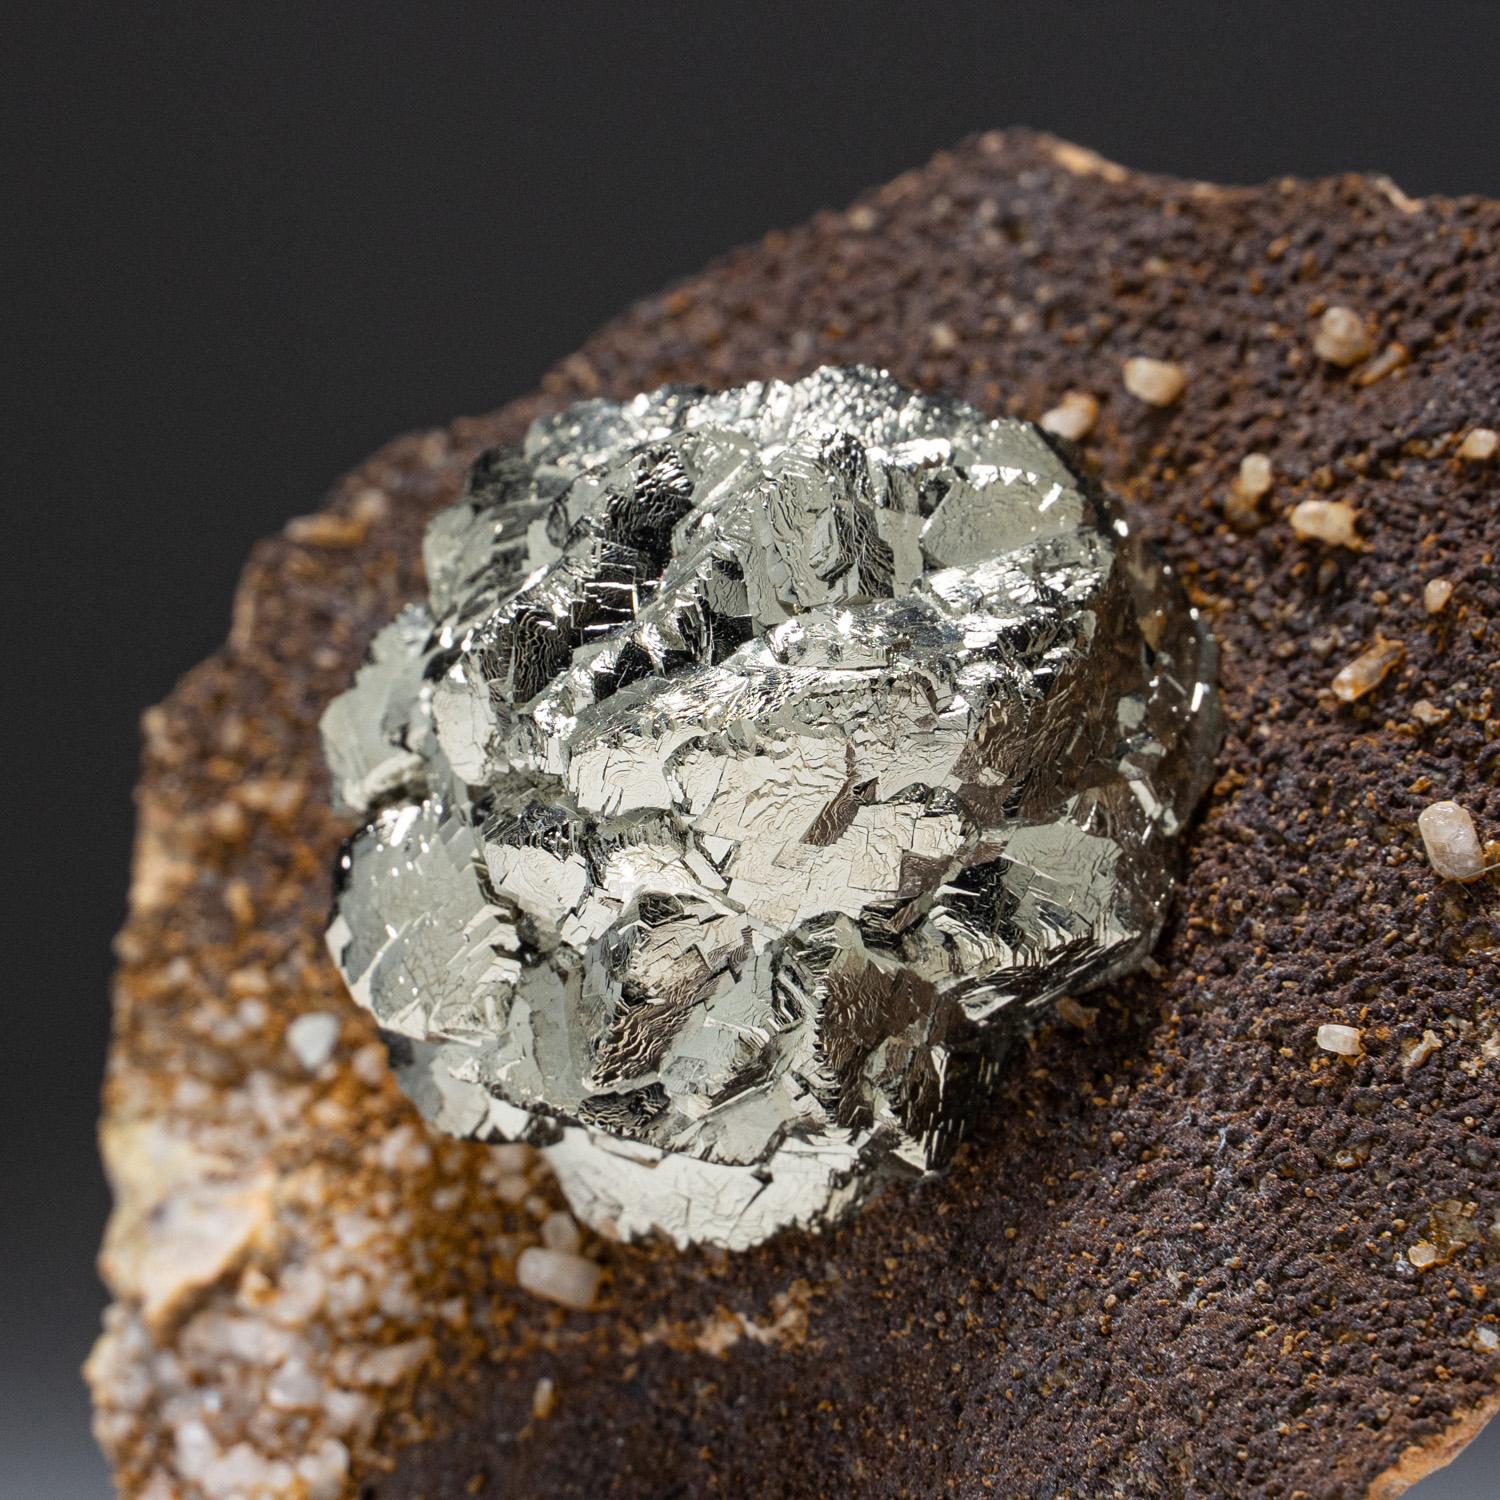 Lustrous radial formation rich golden pyrite crystals a 3 dimension form on matrix embedded with quartz. The pyrite crystals faces have a mirror luster with rich golden yellow tone all throughout. This stunning example of natural pyrite is the